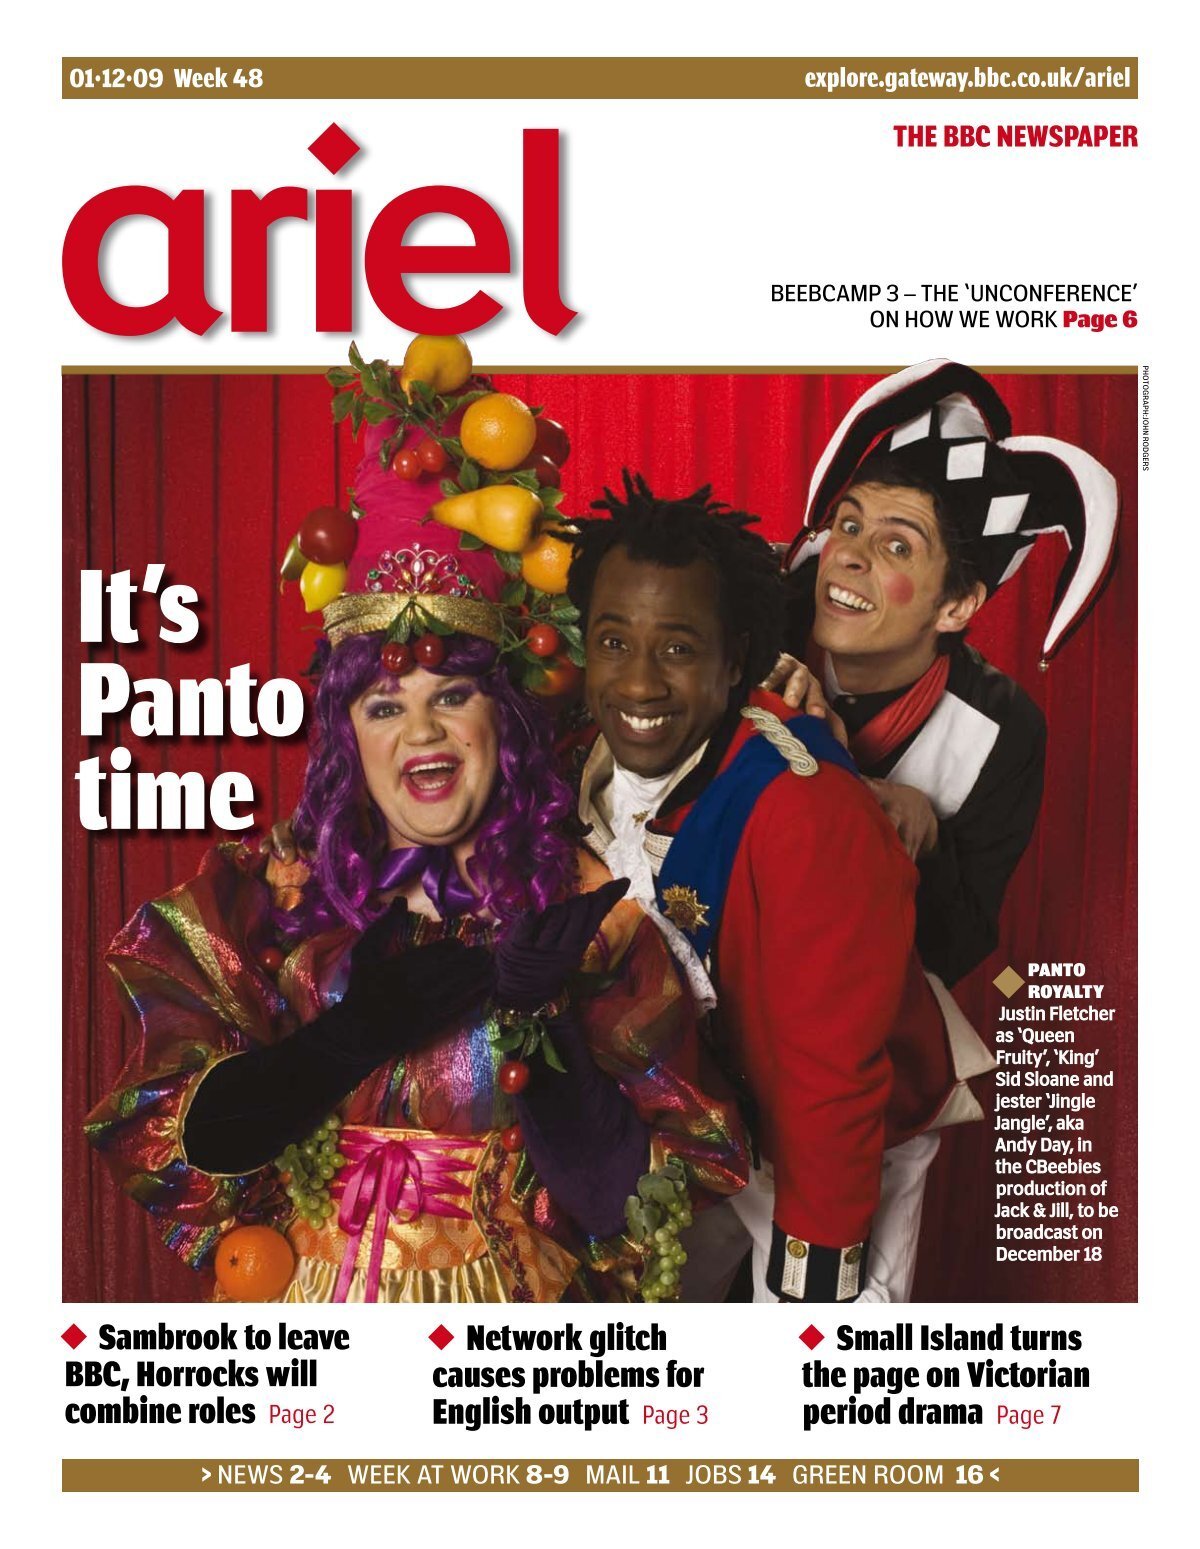 to see an electronic version of this weeks Ariel photo